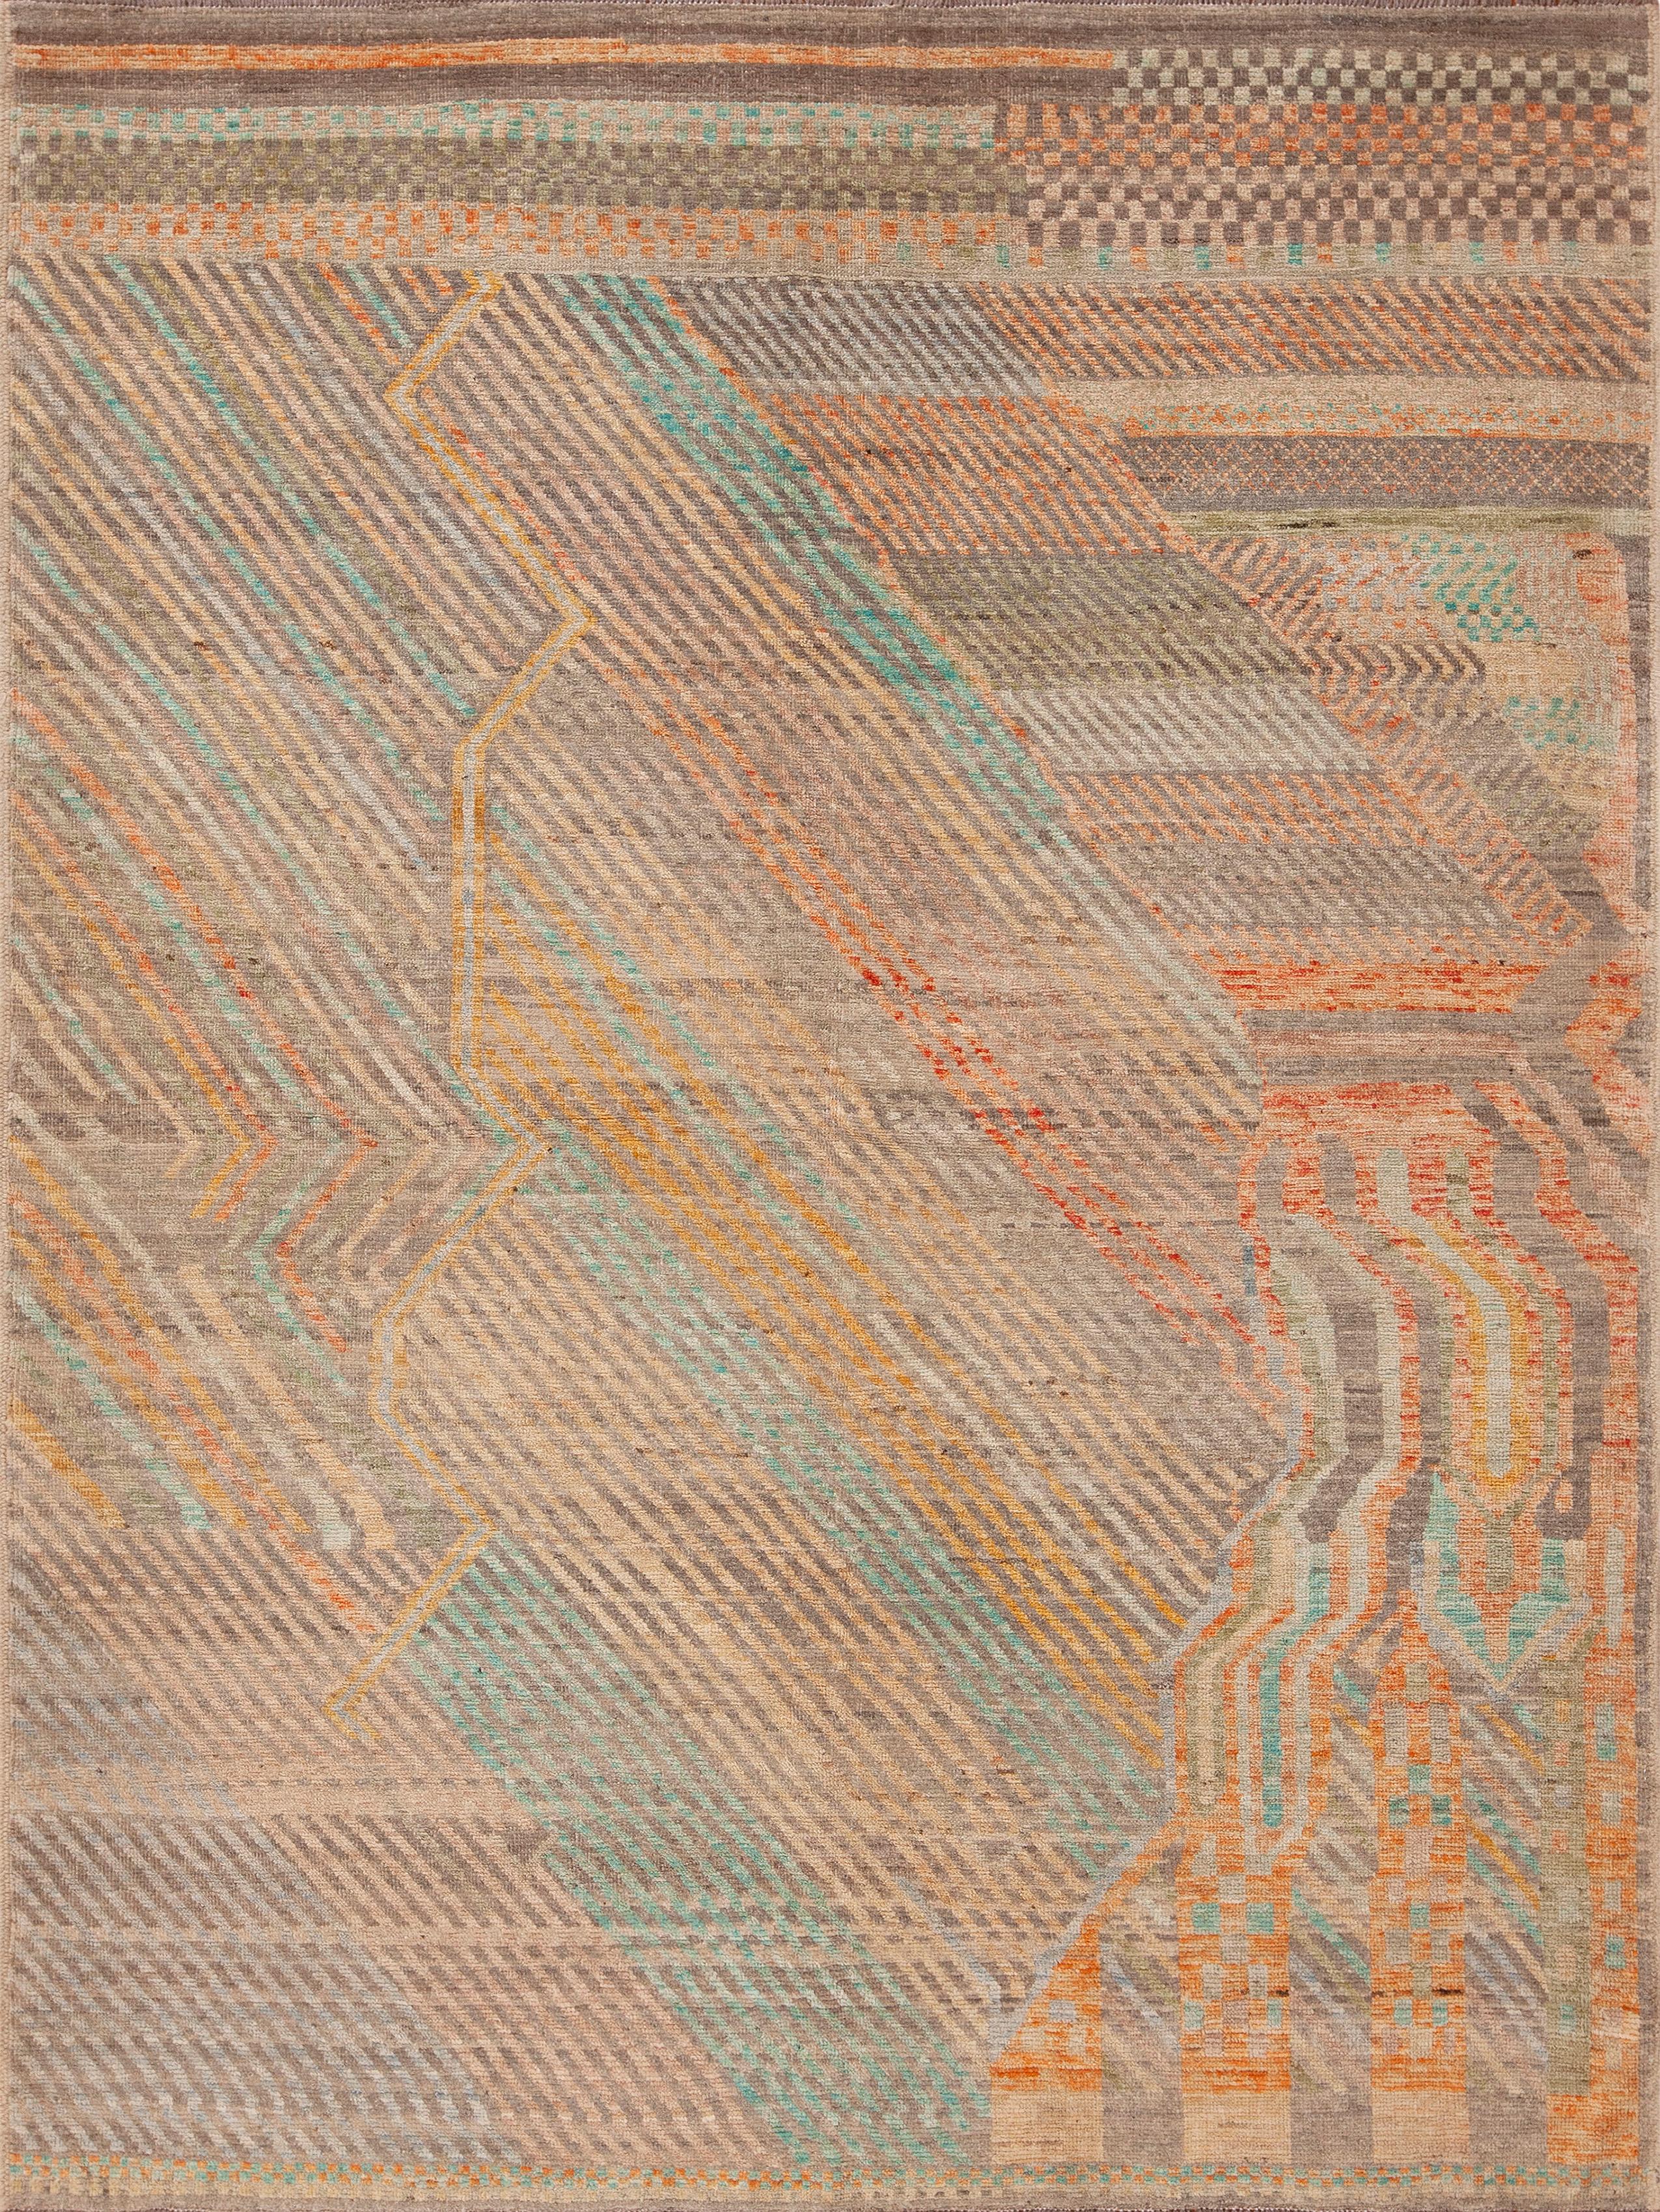 Artistic Handmade Abstract Contemporary Modern Area Rug, Country of origin: Central Asia, Circa date: Modern Rugs